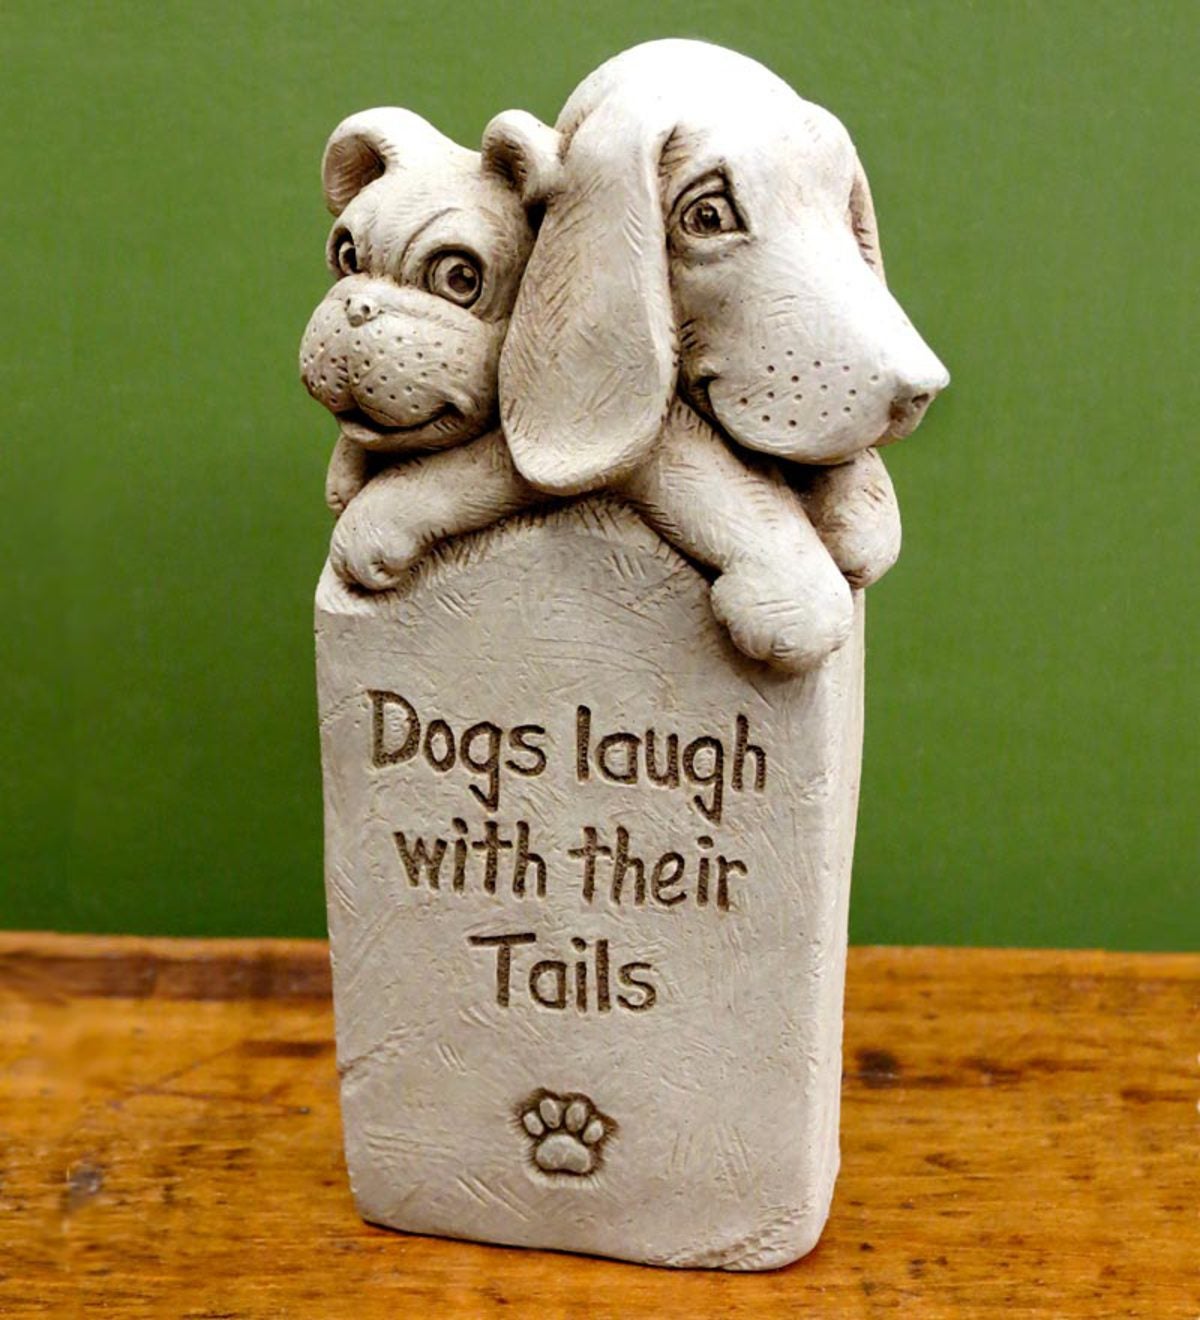 Dogs Laugh With Their Tails Plaque by Carruth Studios